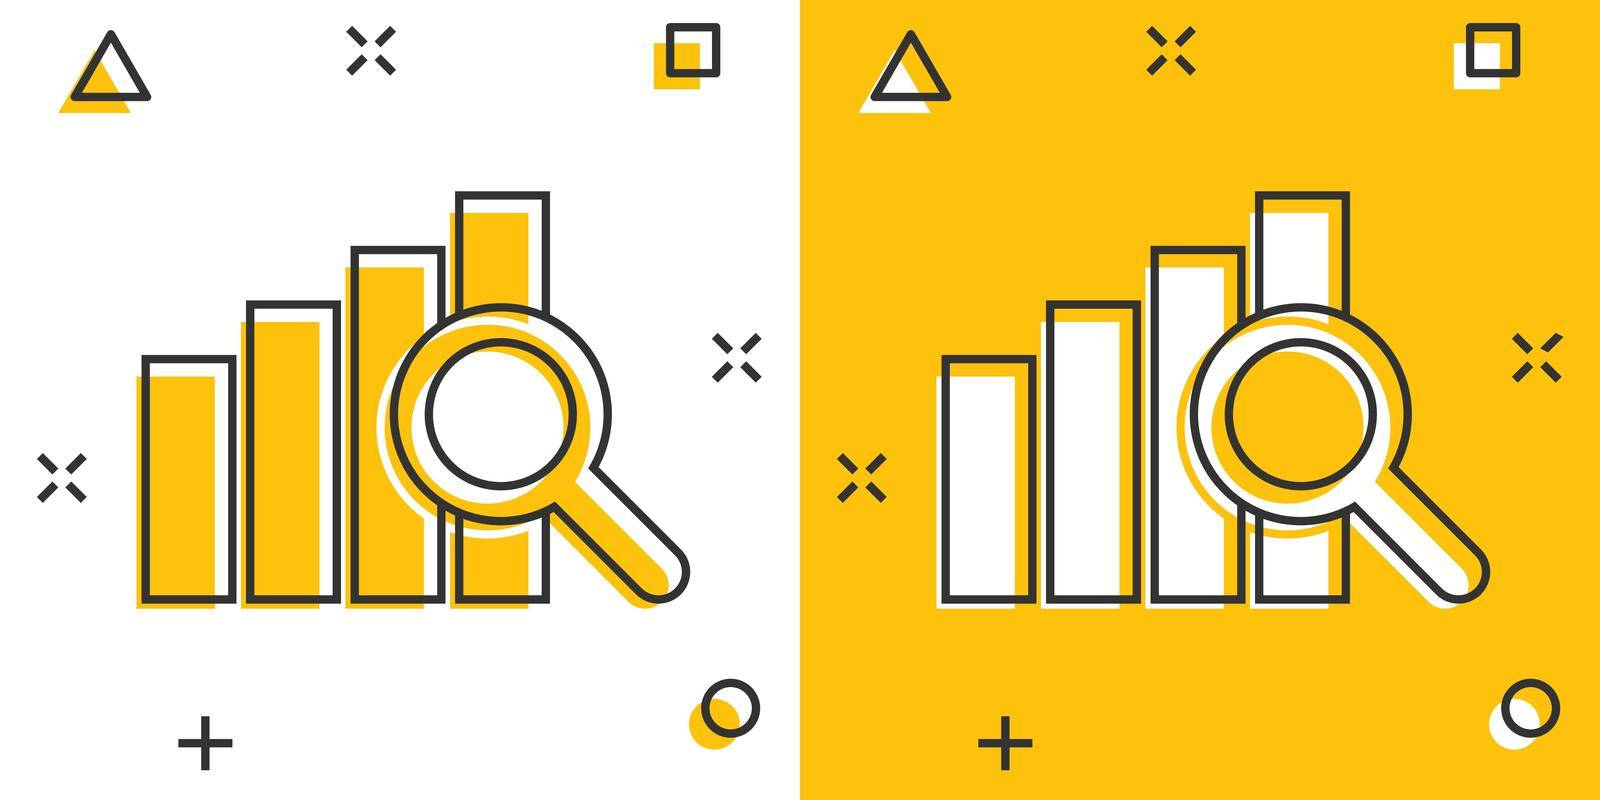 Vector cartoon financial forecast icon in comic style. Analytics financial forecast concept illustration pictogram. Diagram with loupe business splash effect concept.